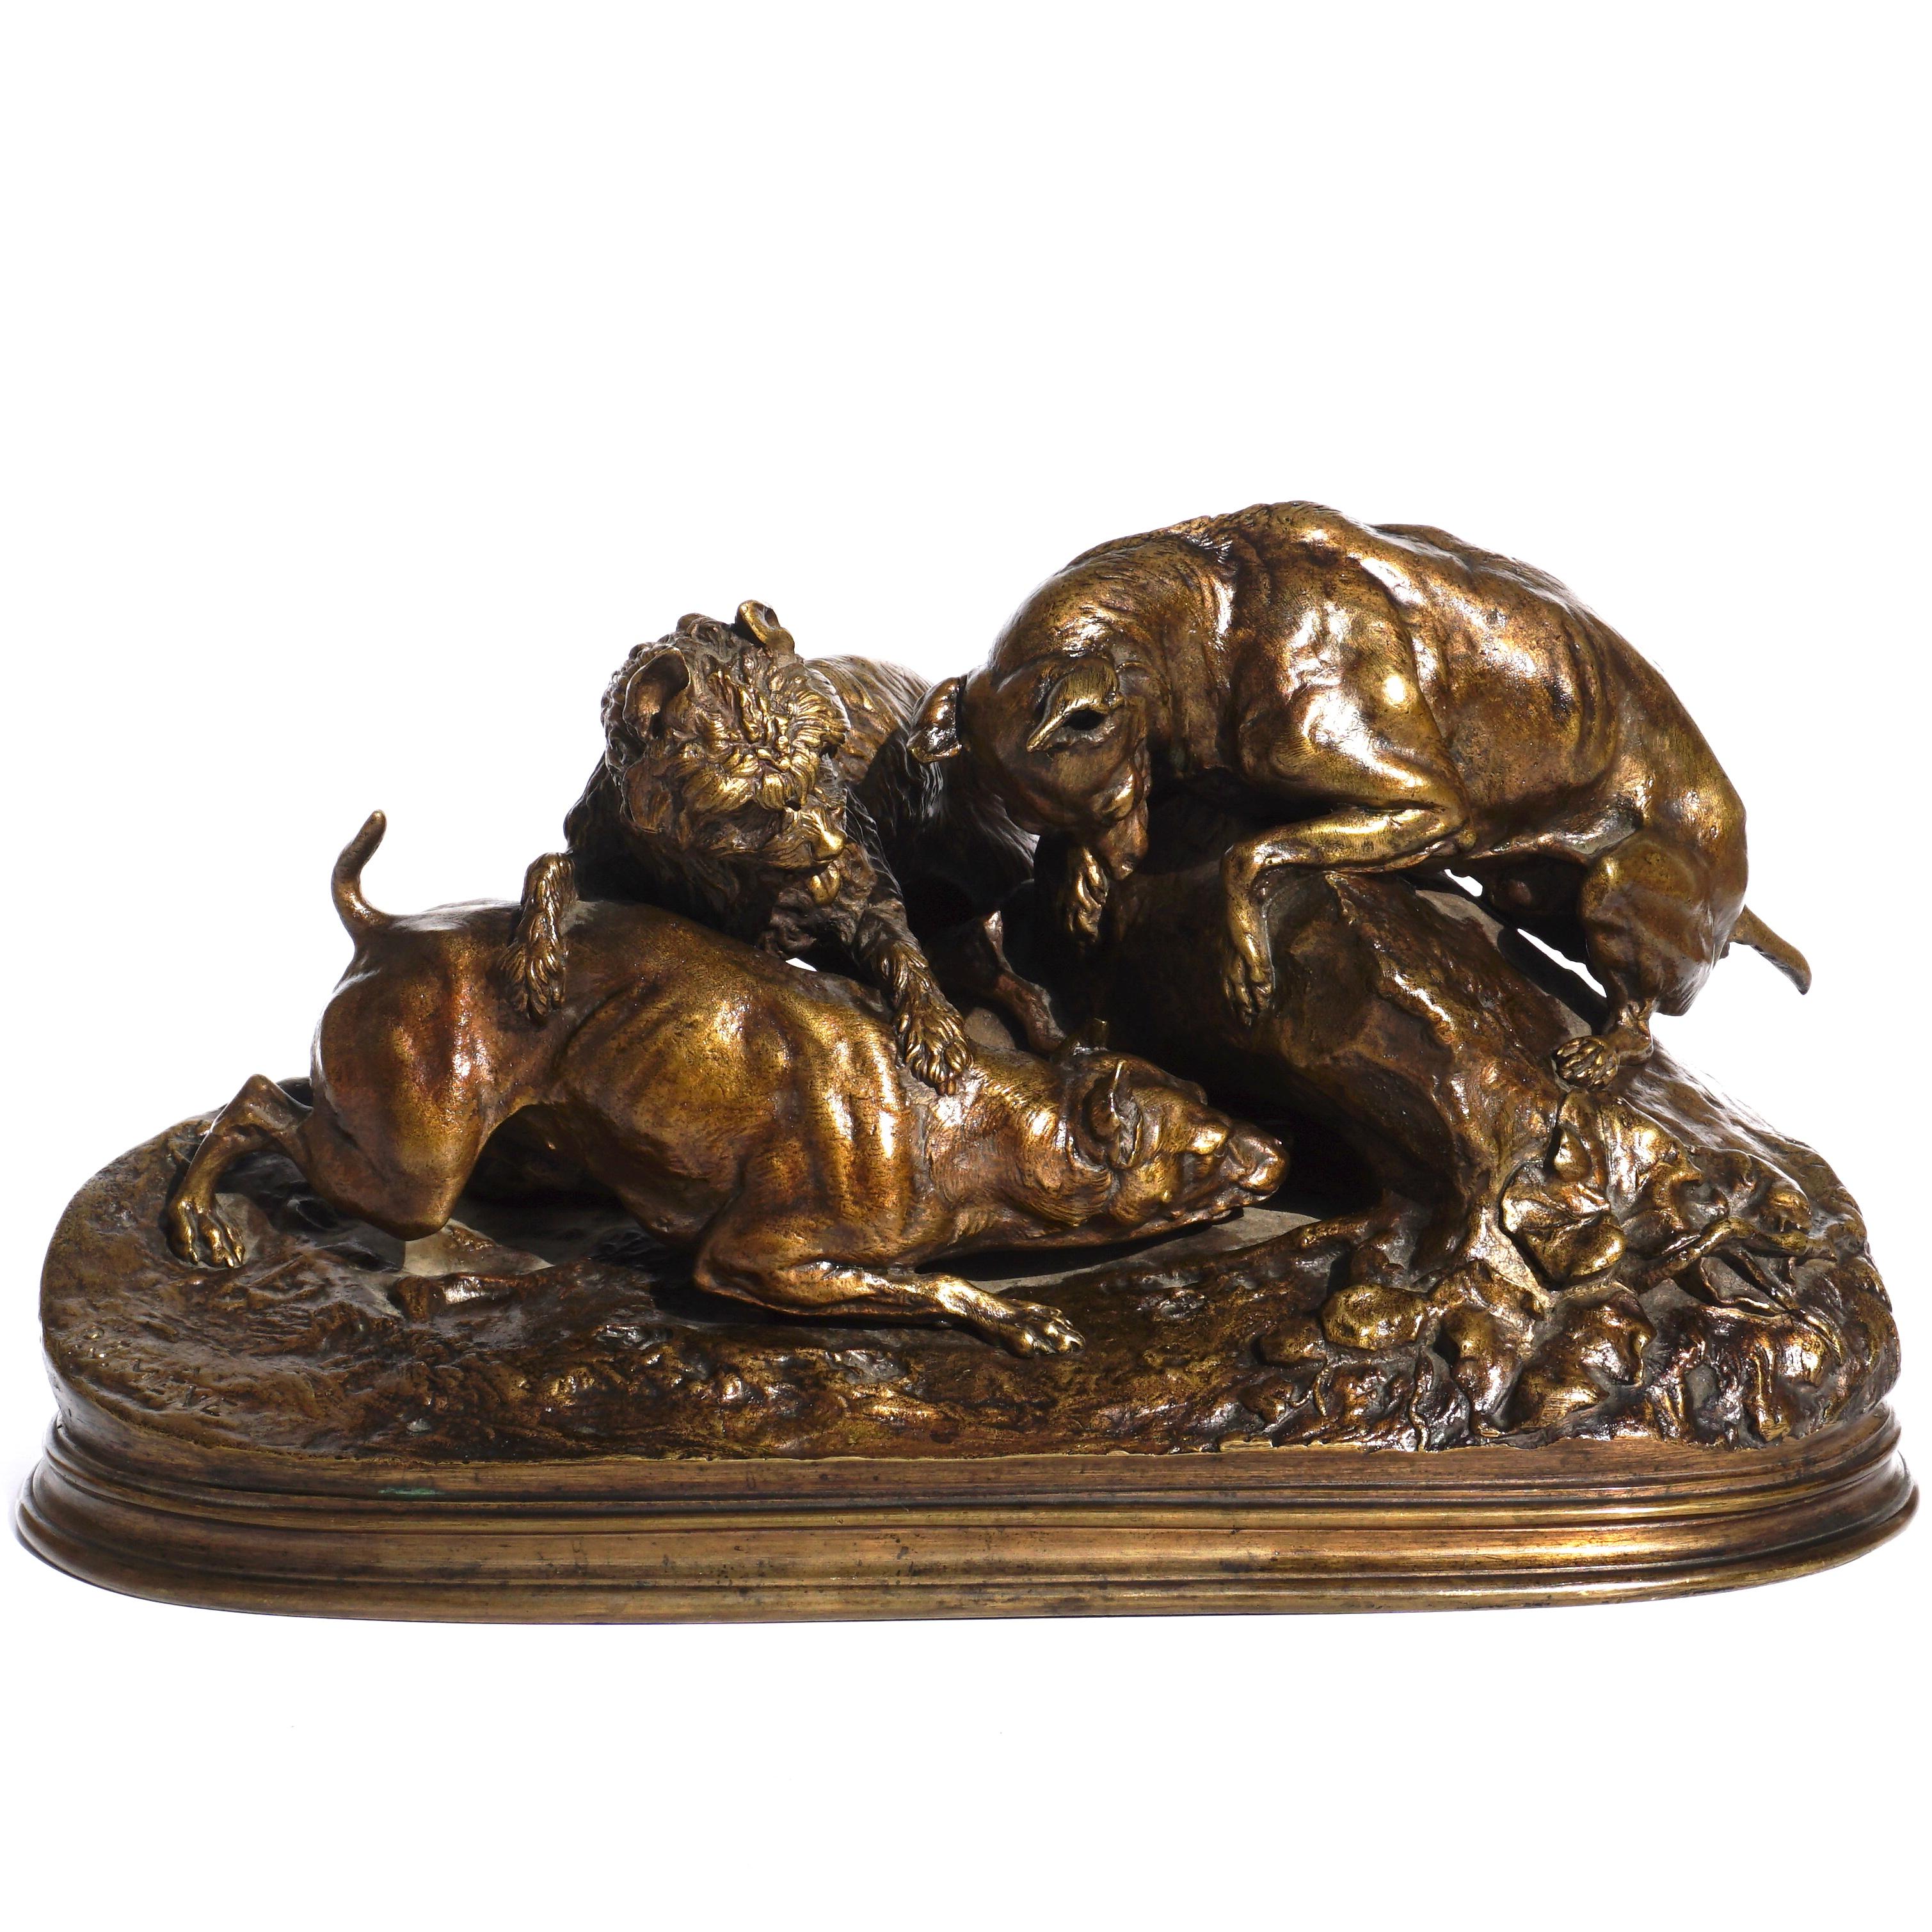 Pierre Jules Mene (FR, 1810-1879) a fantastic grouping of terrier digs burrowing or ferreting out a hare or rabbit from a hole. Also known as:
